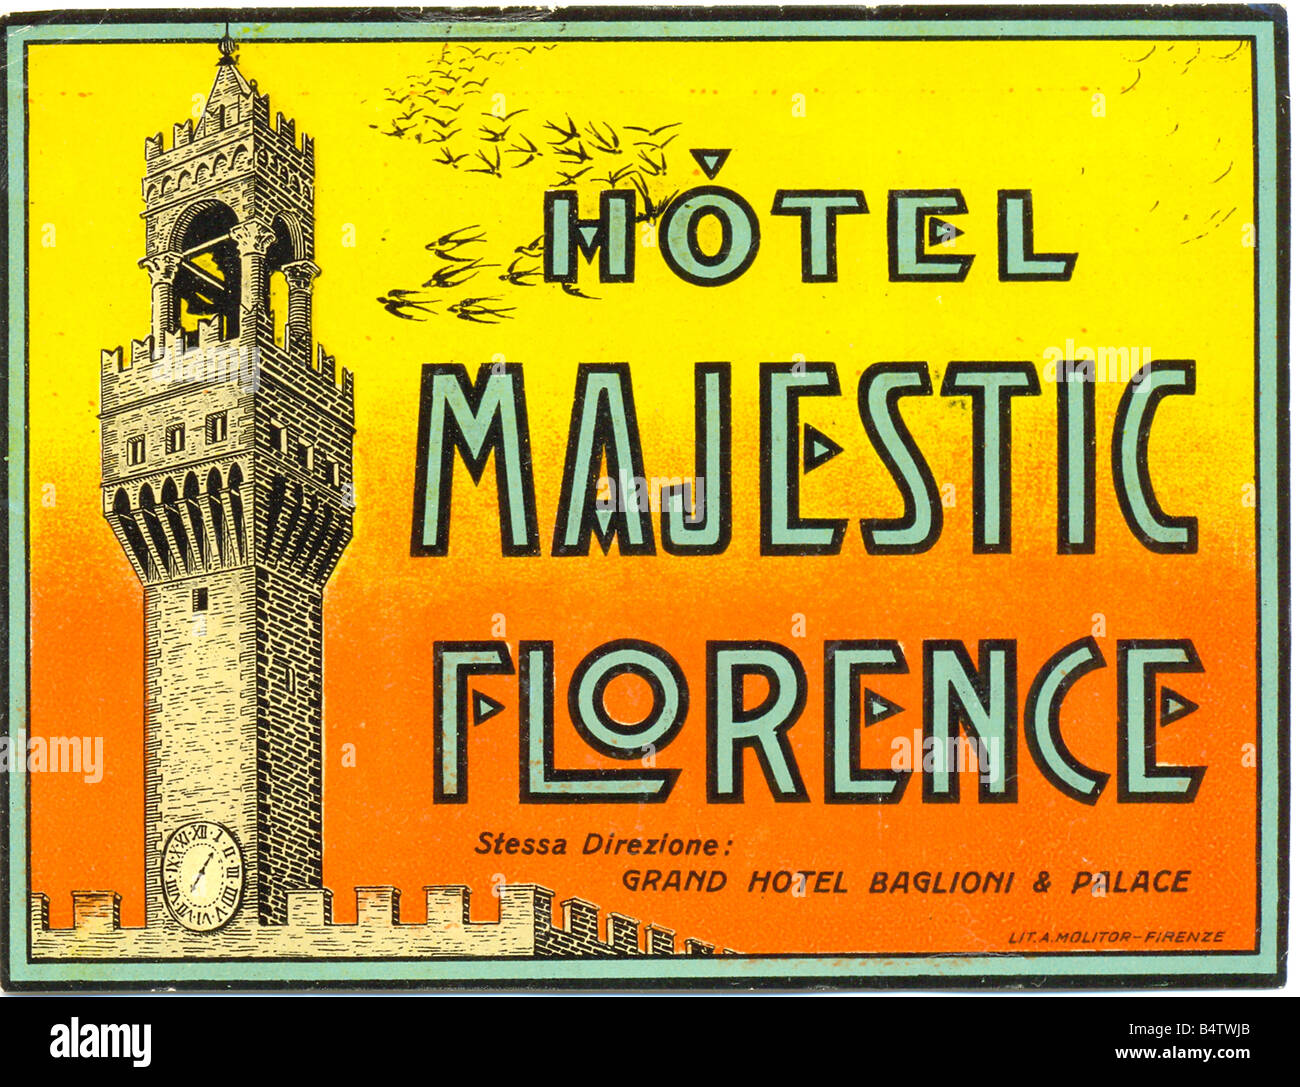 Hotel luggage label for Hotel Majestic, Florence, Italy, circa 1930 Stock Photo